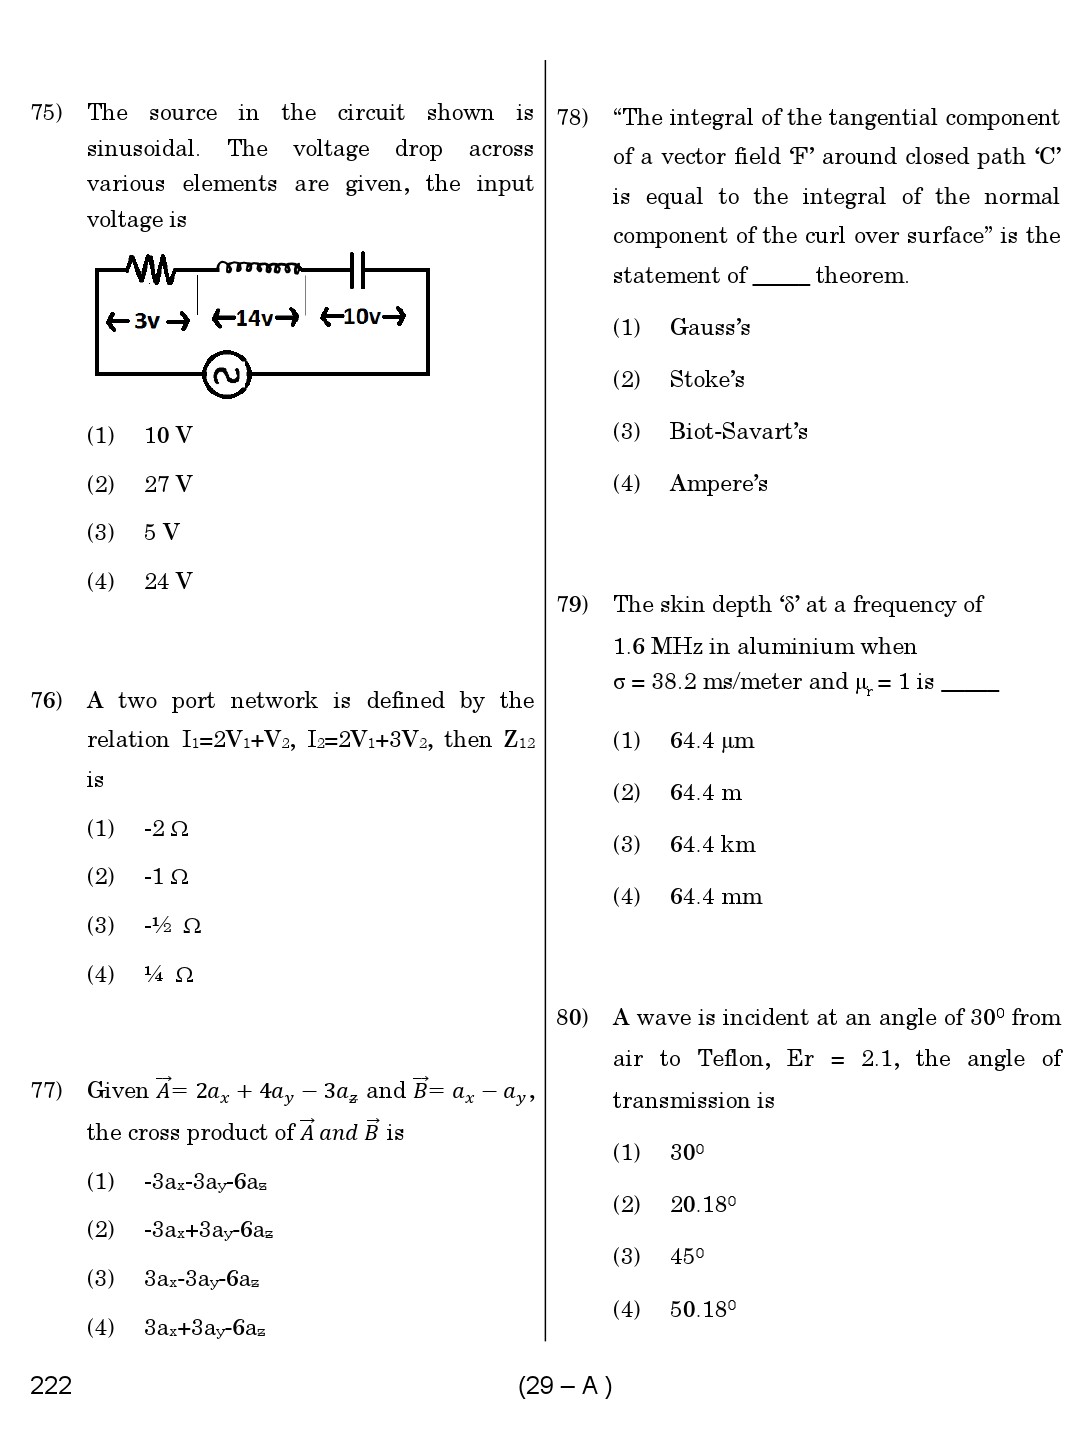 Karnataka PSC Assistant Engineer Electrical Exam Sample Question Paper 29